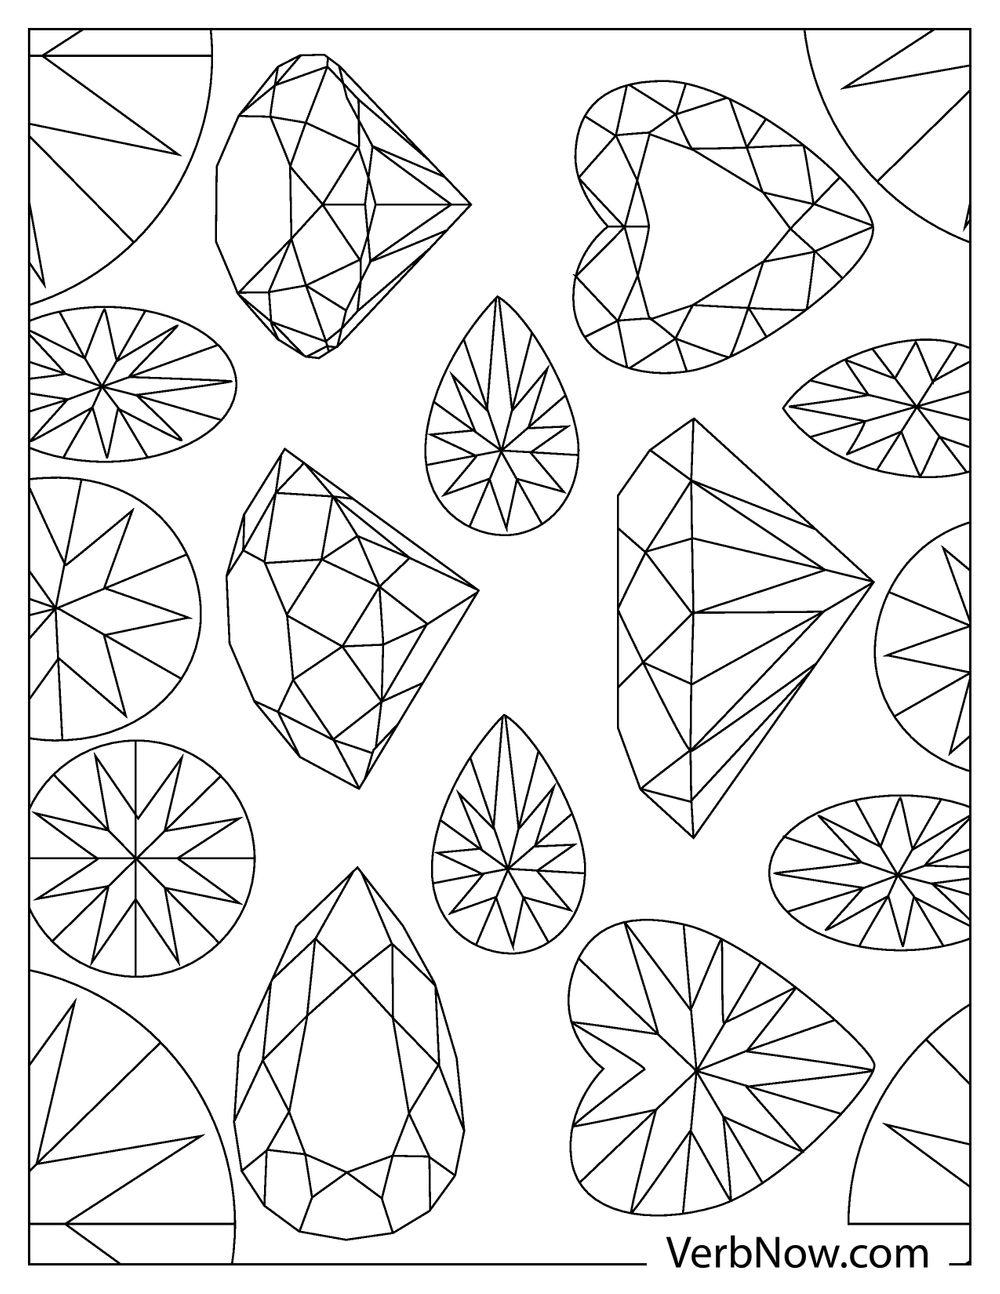 Free GEMSTONES Coloring Pages & Book for Download (Printable PDF) - VerbNow